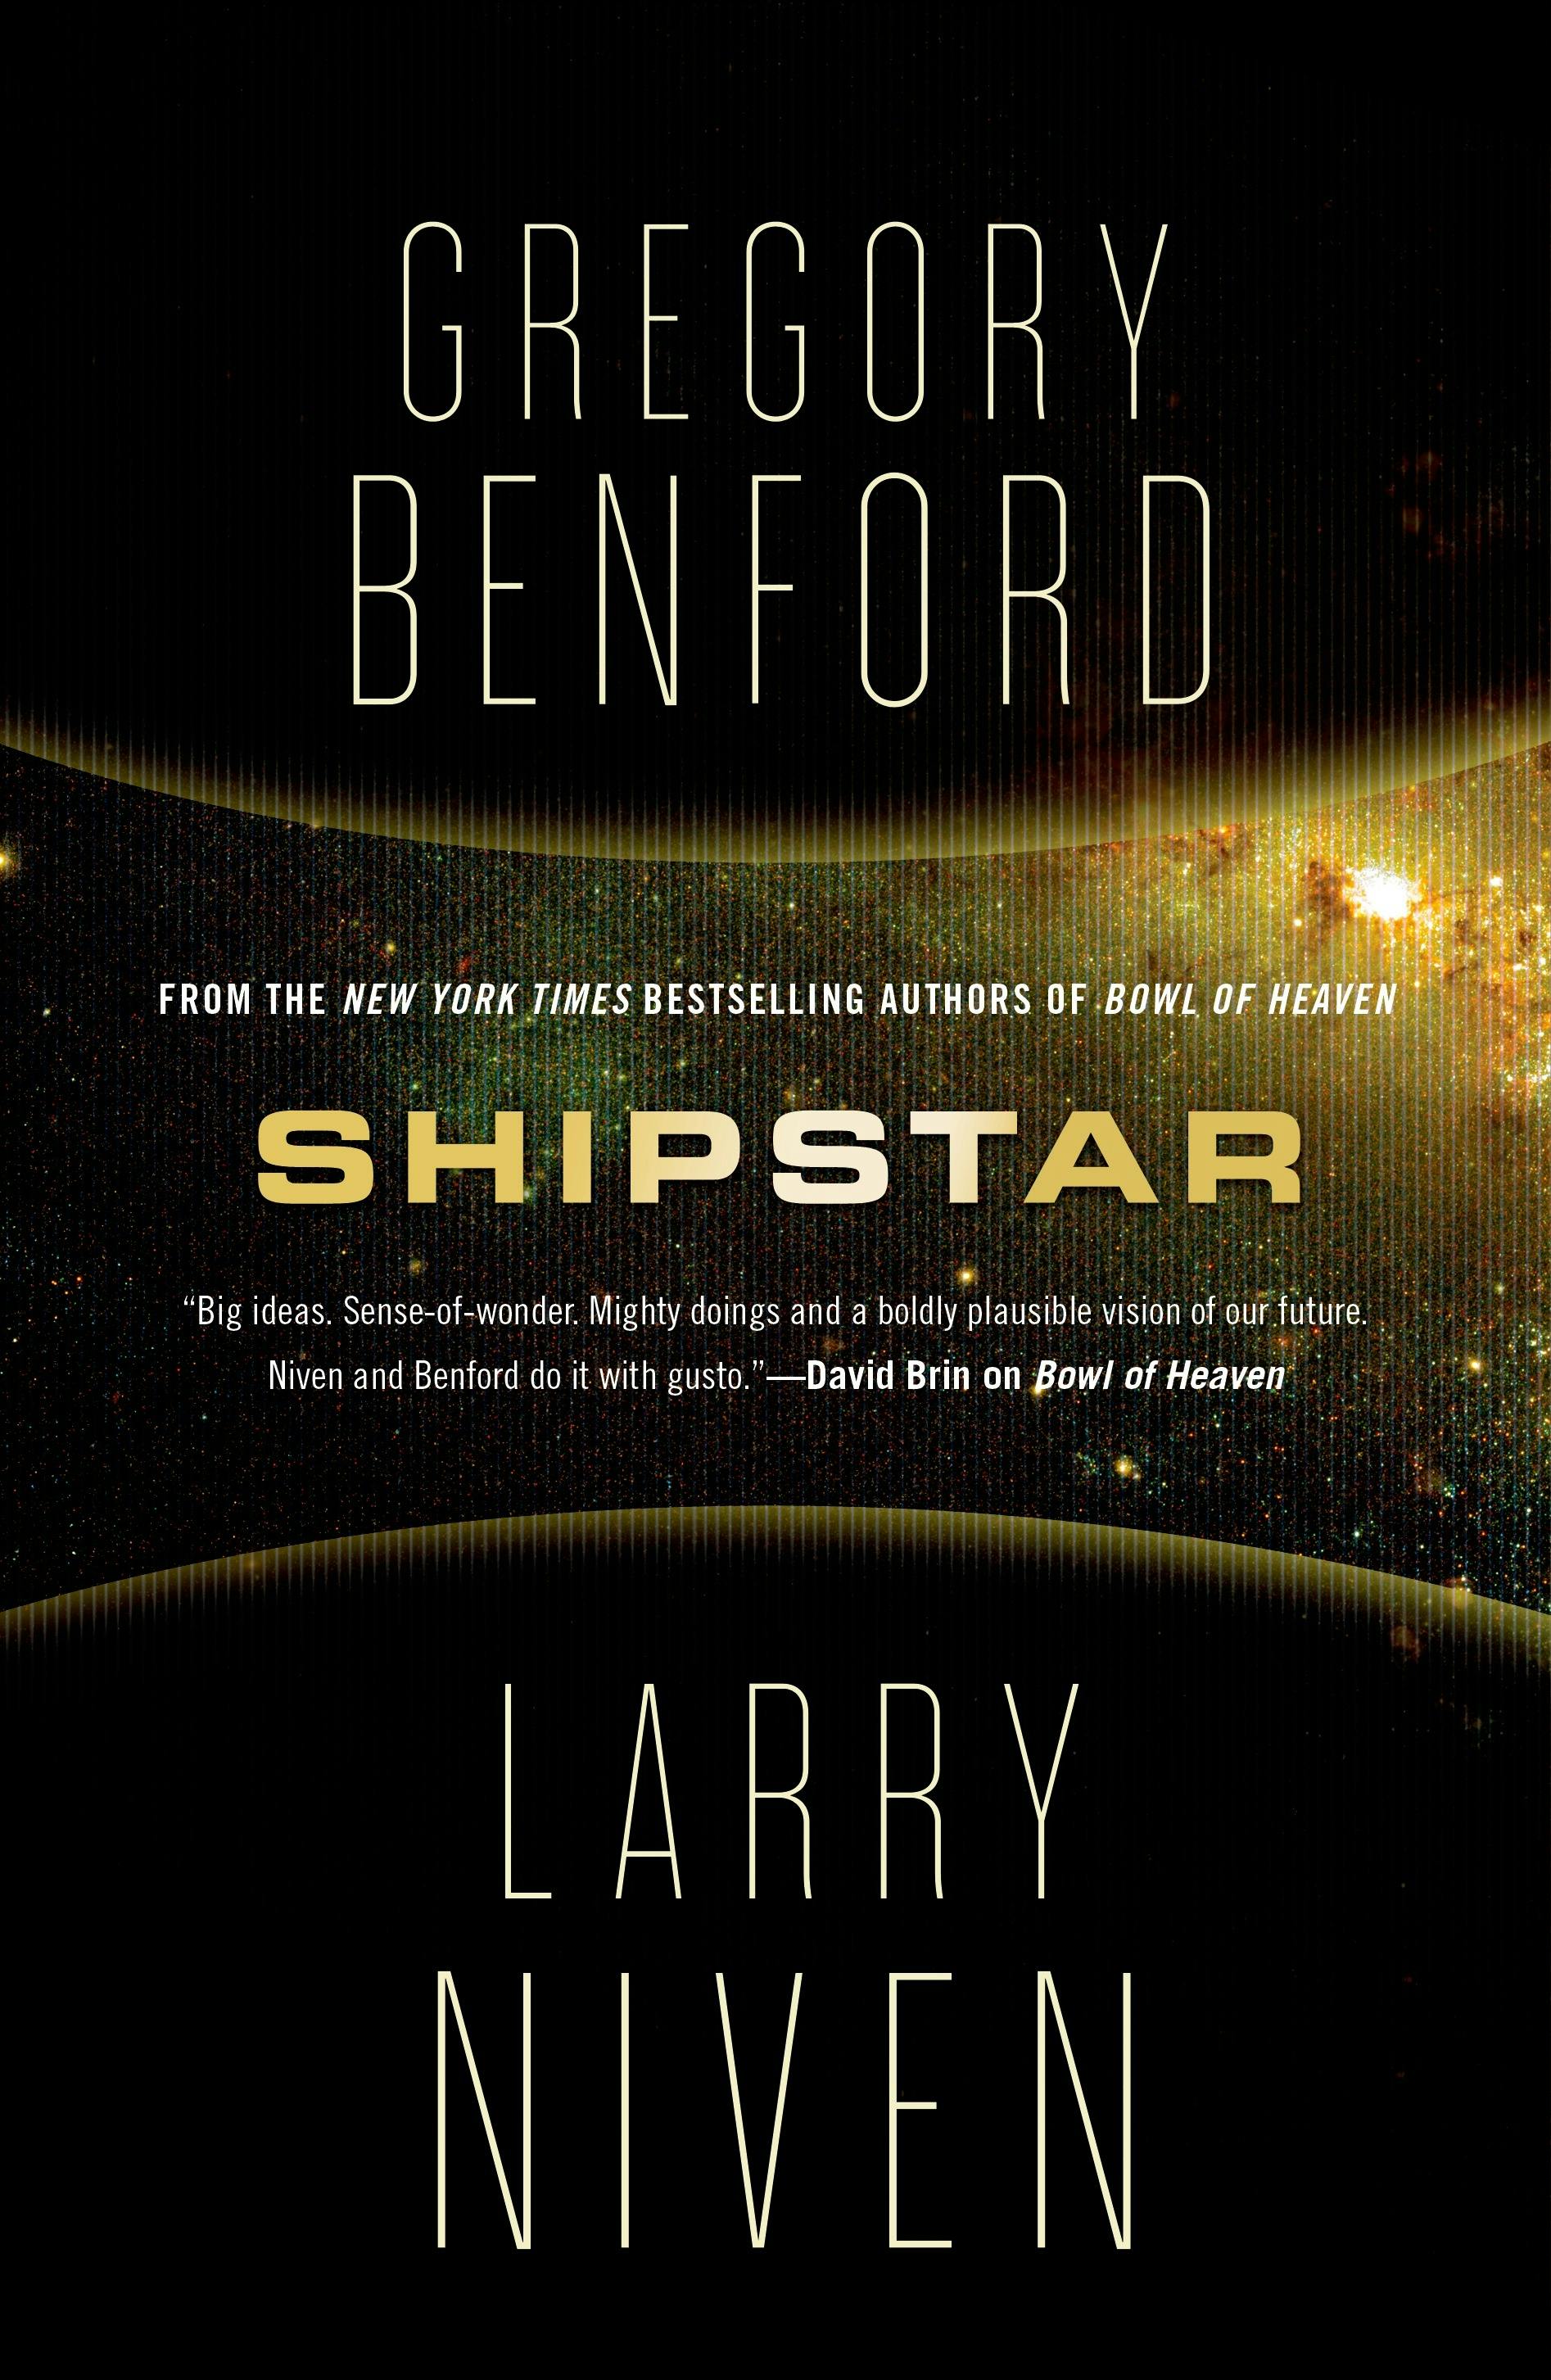 Cover for the book titled as: Shipstar